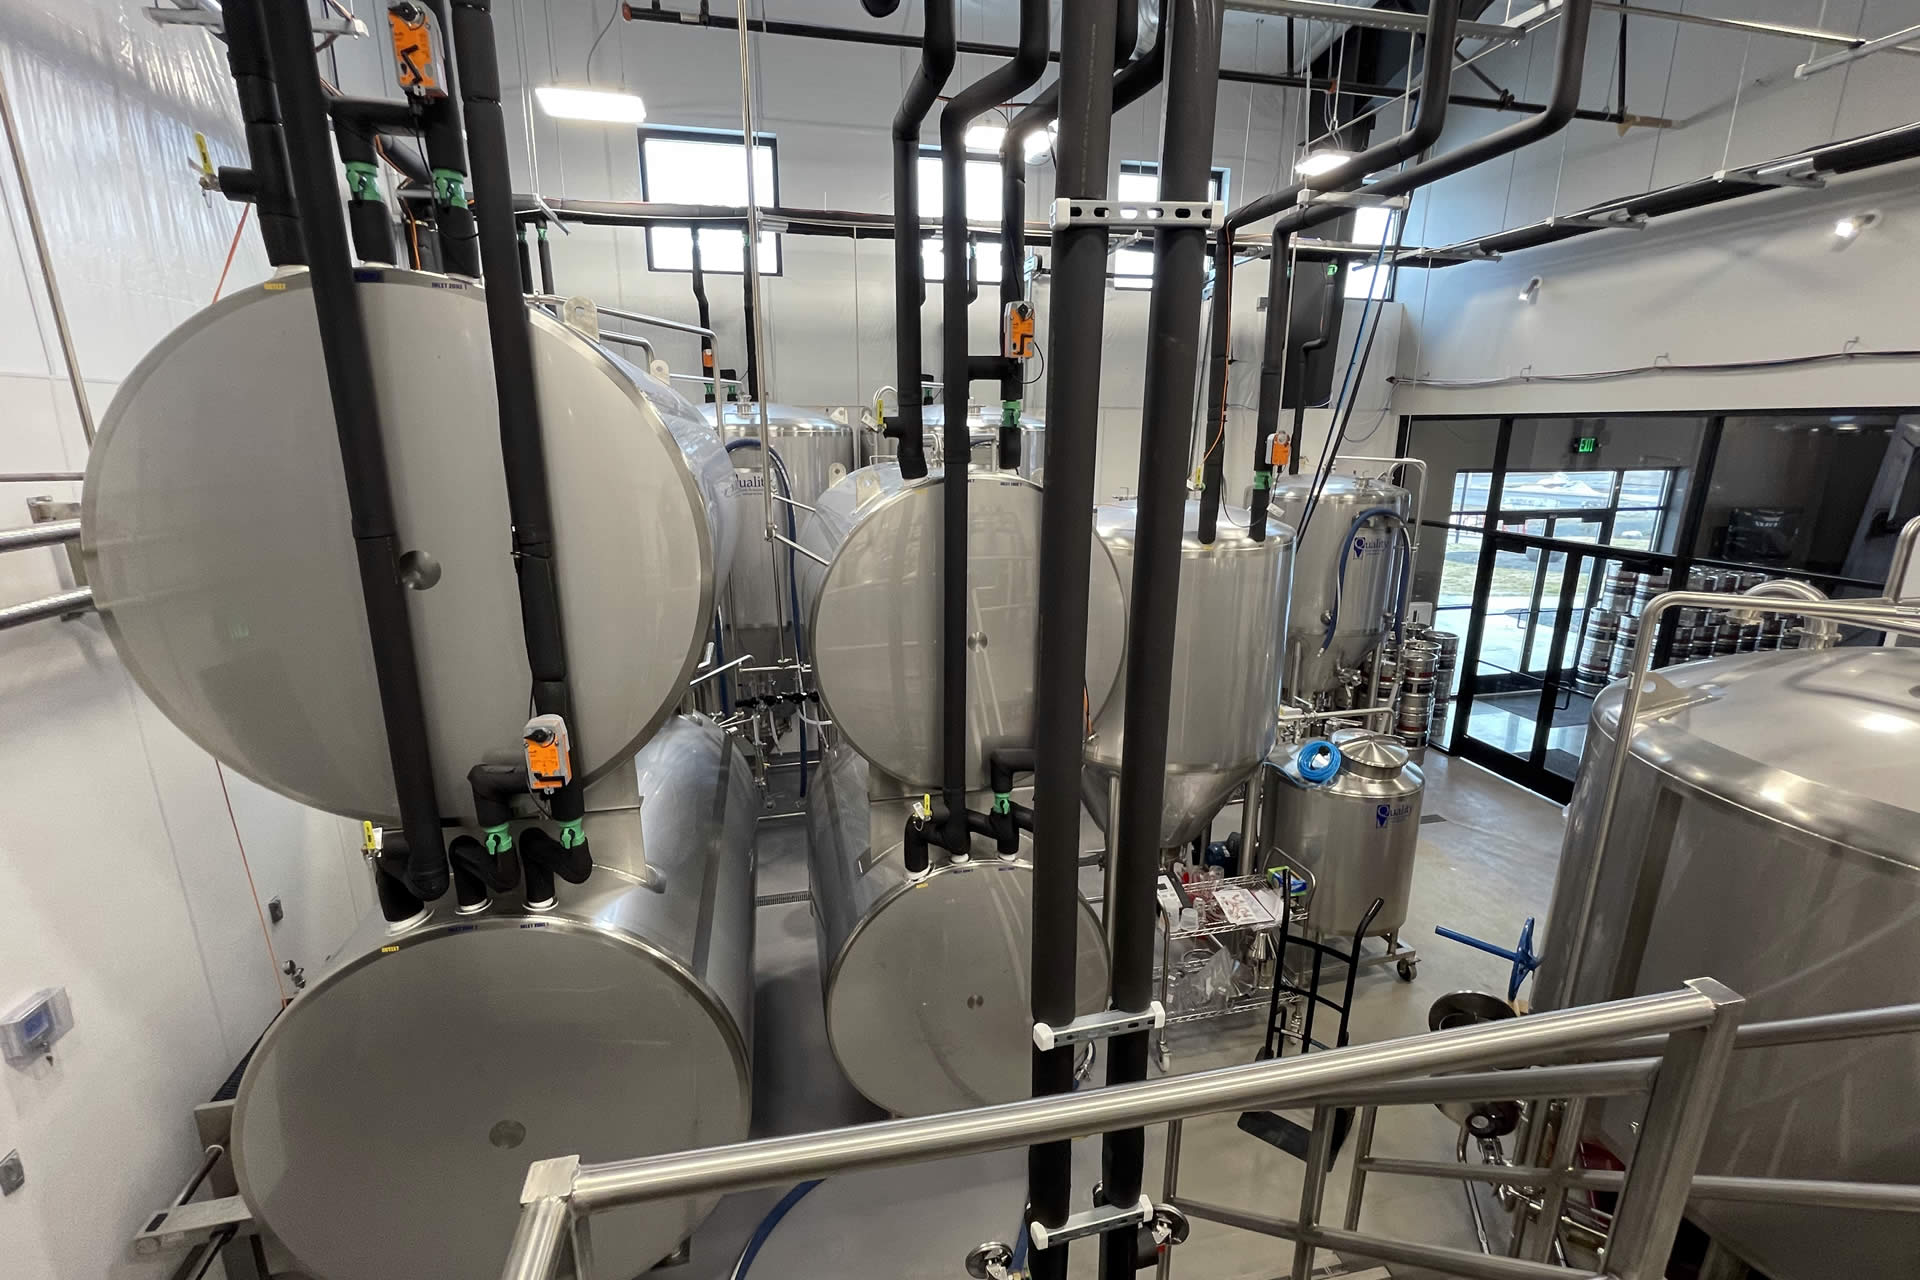 Vantage Point Brewing Co brewing equipment